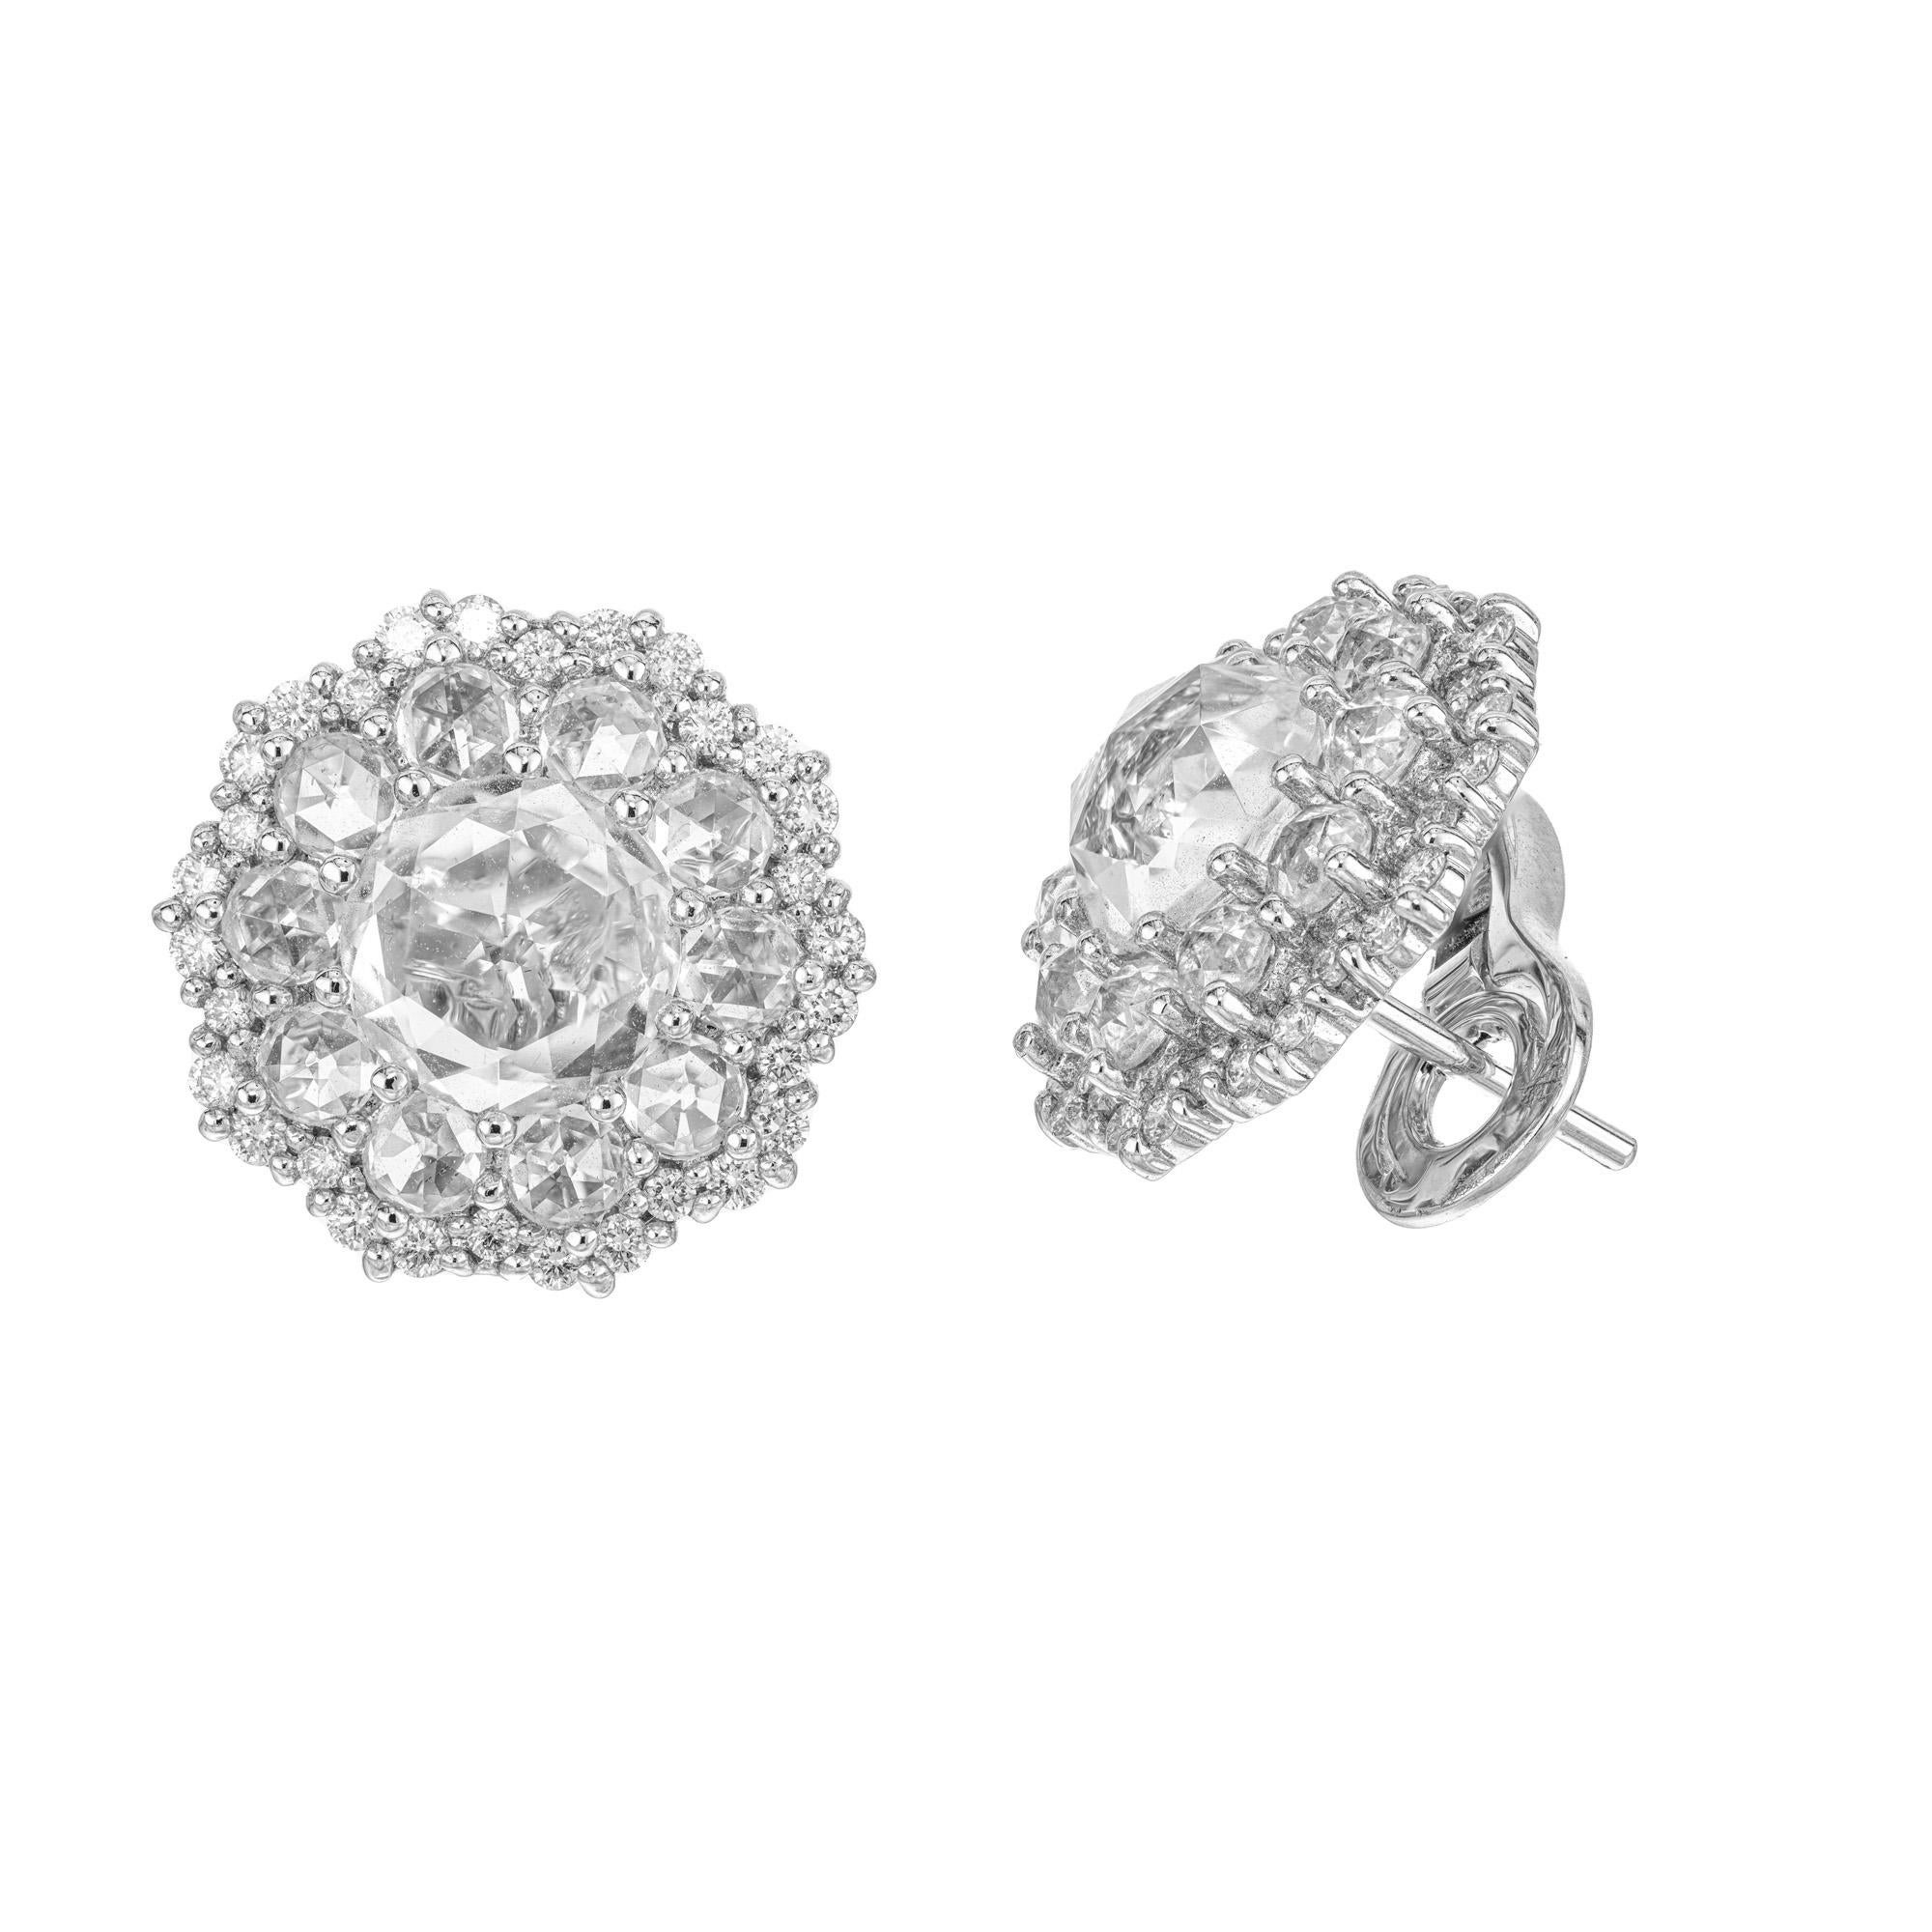 Beautiful Topaz and Diamond cluster lever back earring. These earring begin with 2 round white Topaz center stones accented with a double halo of round white topaz and round cut diamonds and set in 18k white gold and completed with lip post backs. 